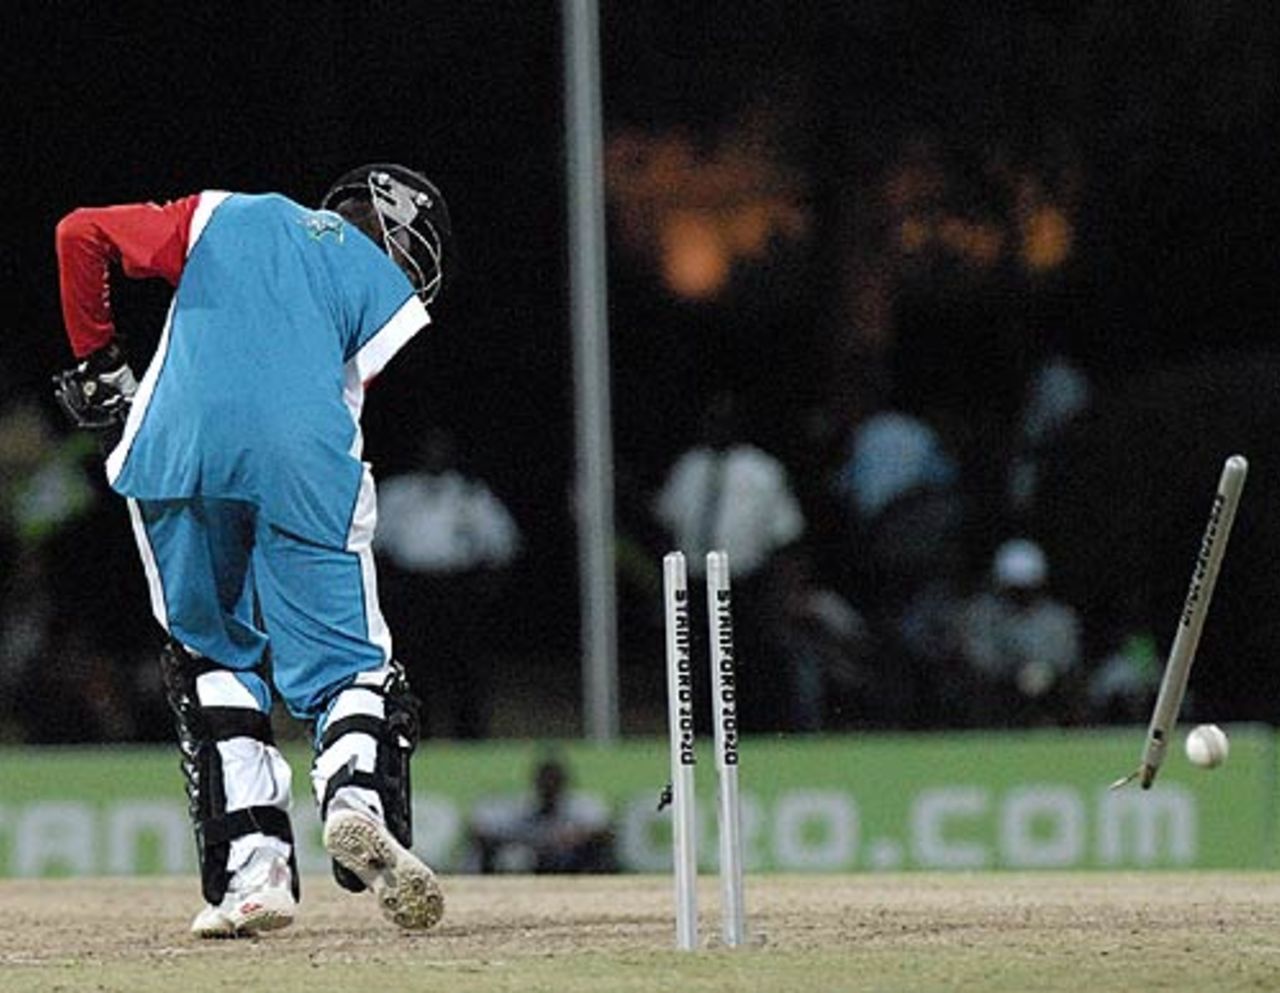 Othhneil Baptiste sends Sherwin Peter's off stump for a walk, St Maarten v St Vincent and the Grenadines, 6th match, Stanford 20/20, Antigua, February 1, 2008